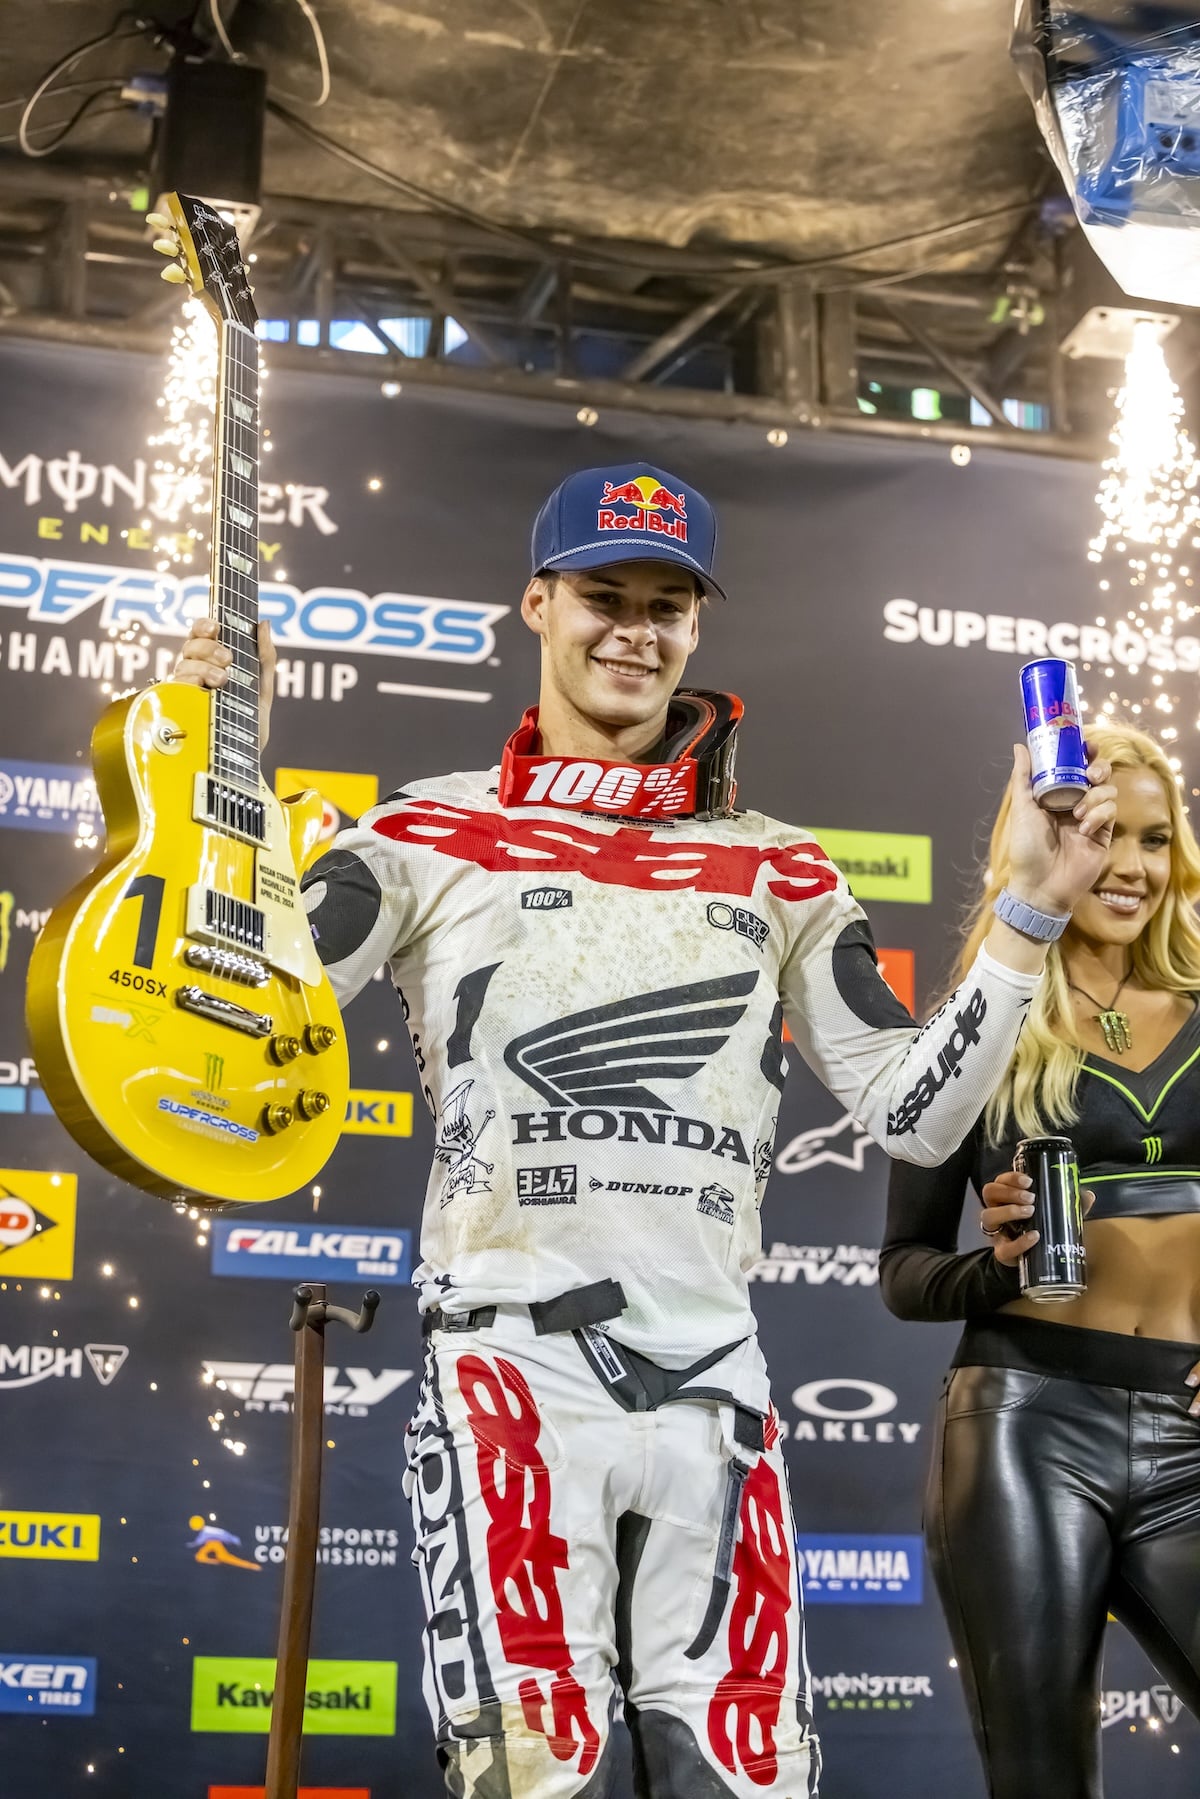 Jett Lawrence literally slashed the competition at the 2024 Nashville Supercross. Photo: Garth Milan.